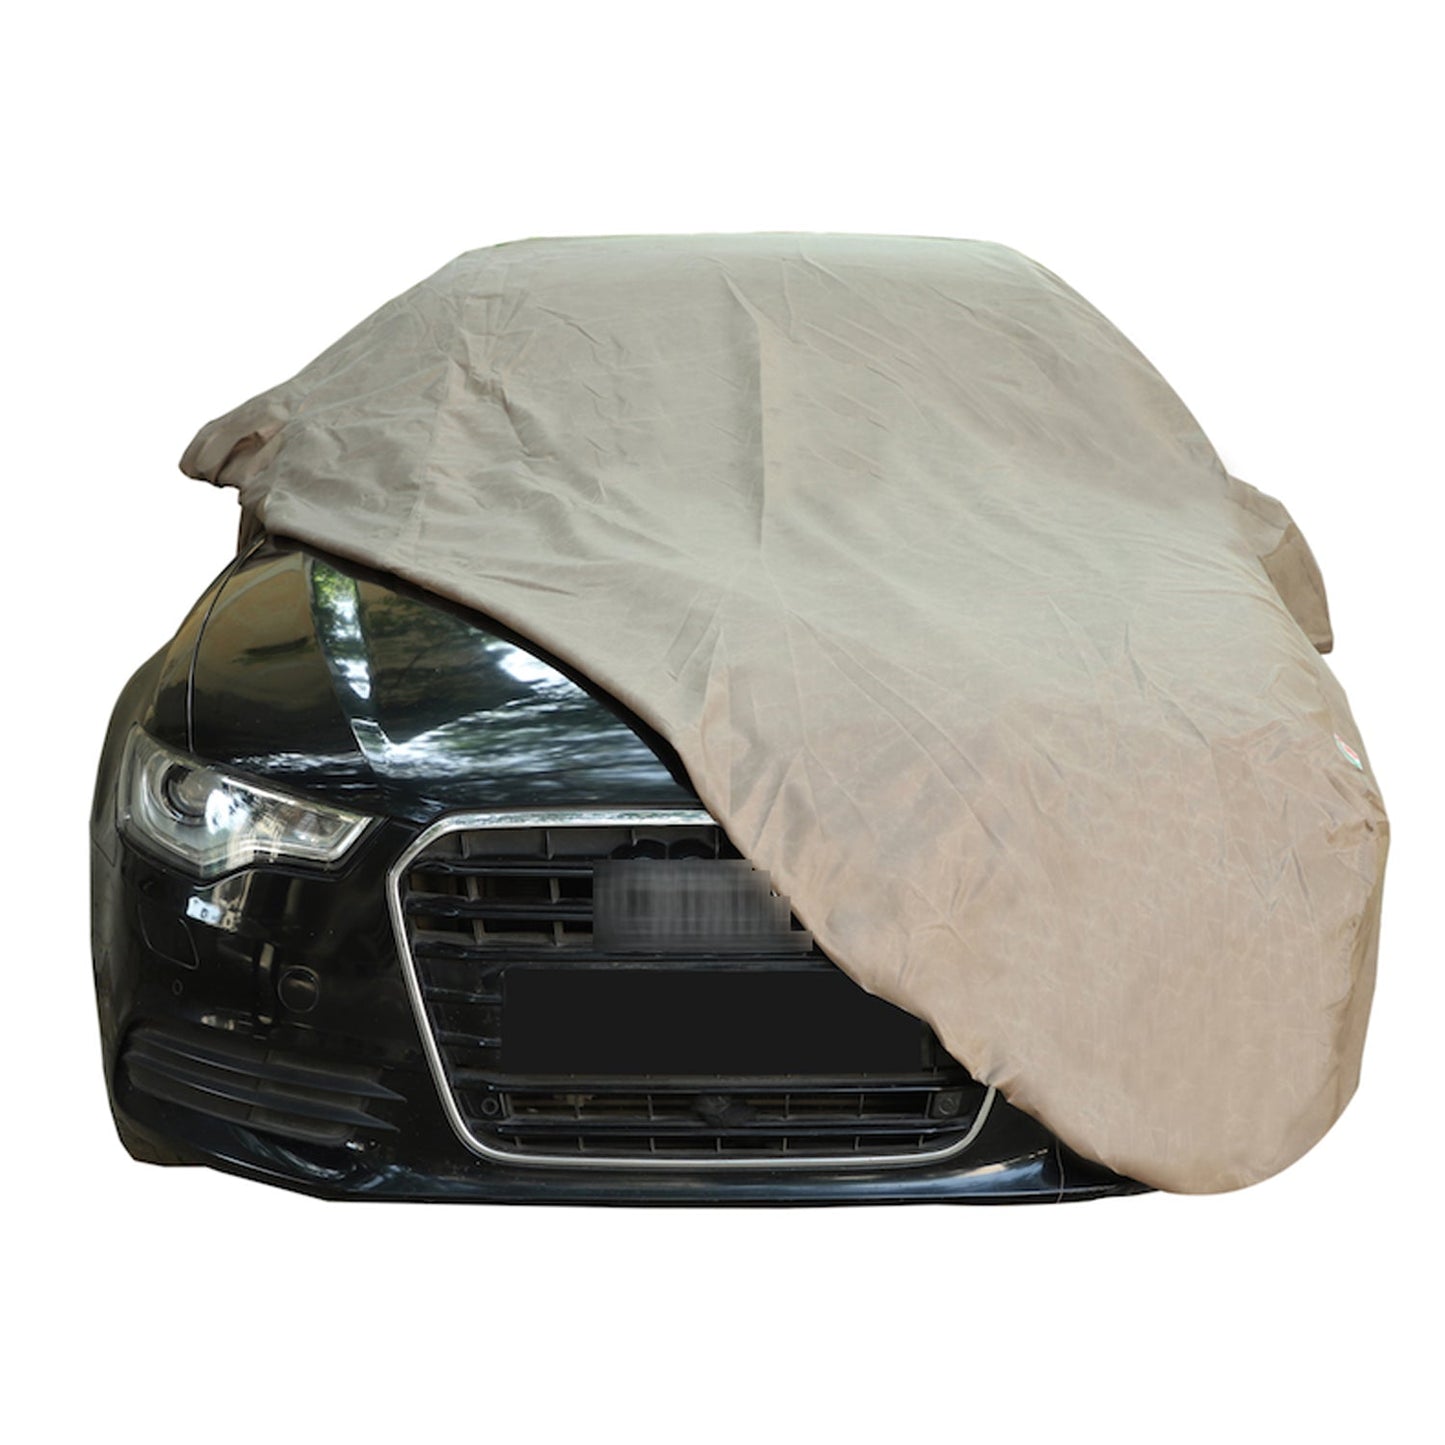 Oshotto Brown 100% Waterproof Car Body Cover with Mirror Pockets For Audi Q5